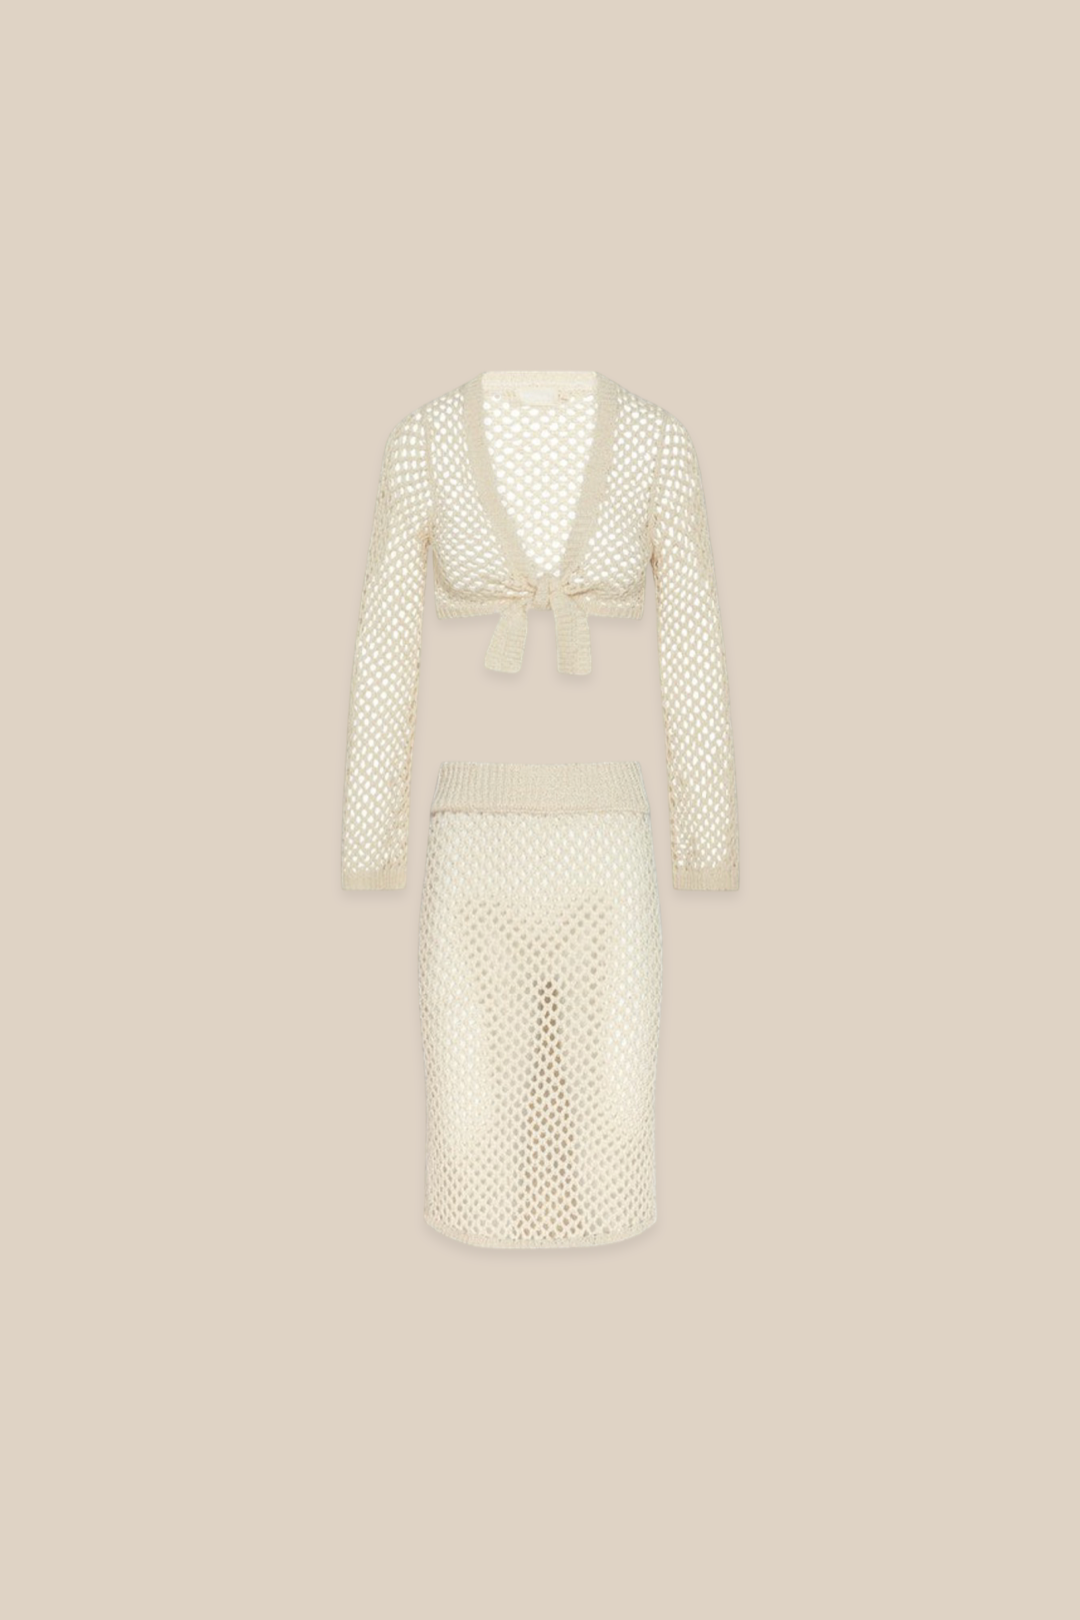 RIVIERA COVER-UP SET